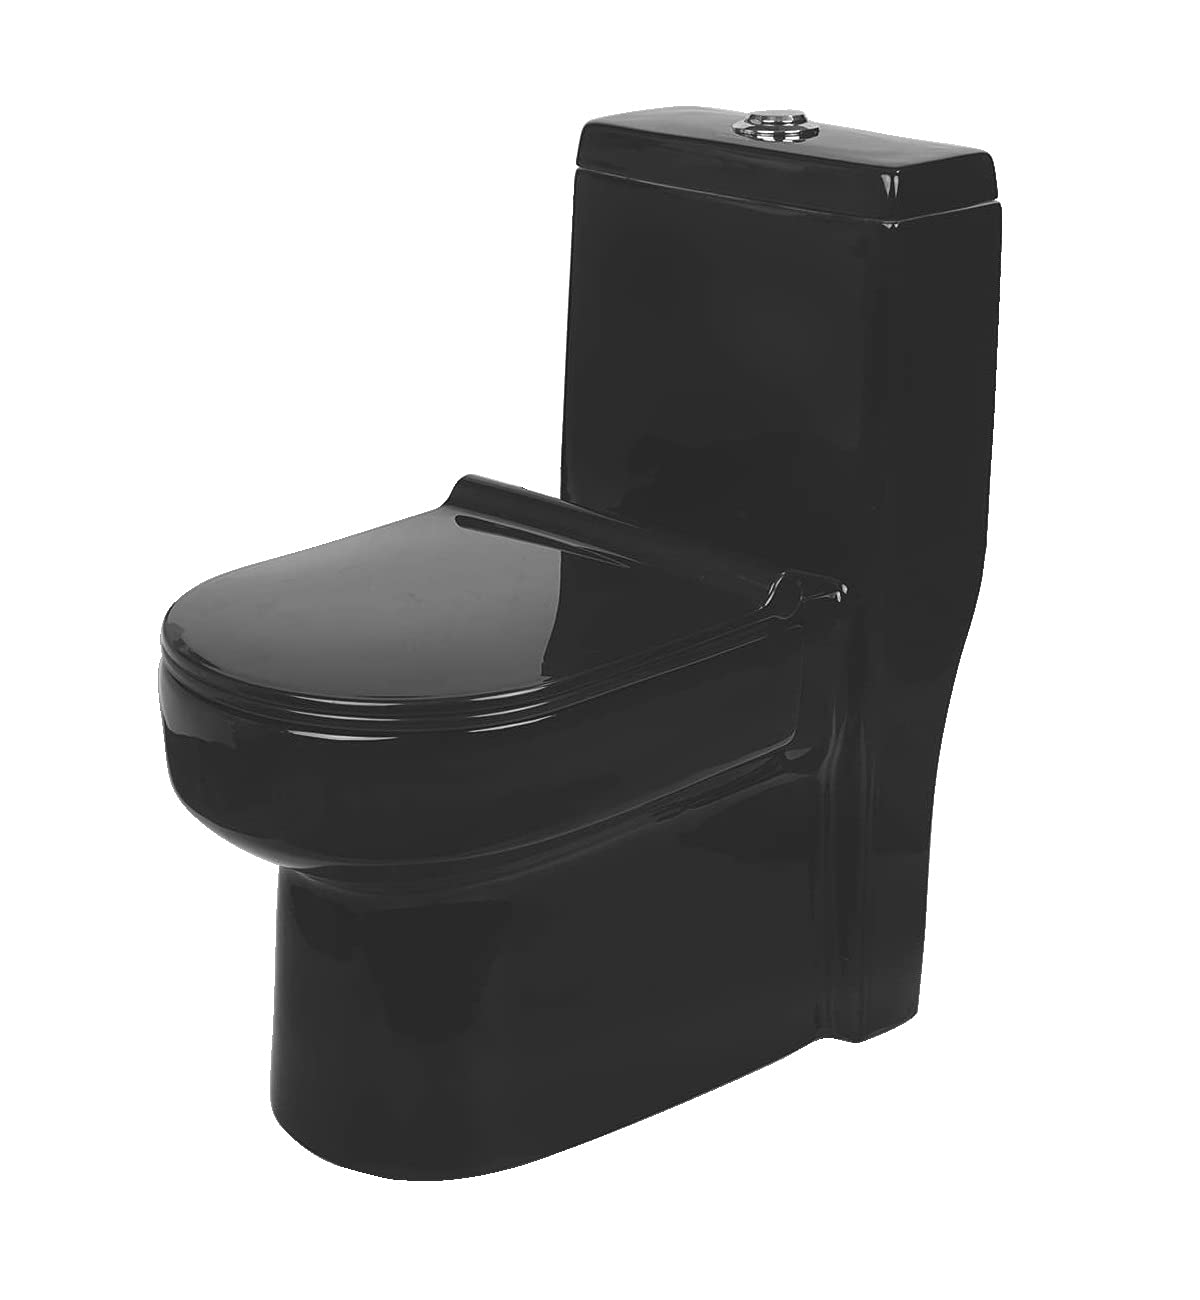 InArt Dual Flush One Piece Syphonic Elongated Toilet with Actuator Flush Decorative Toilets - Seat Included in Glossy Black Color - InArt-Studio-USA